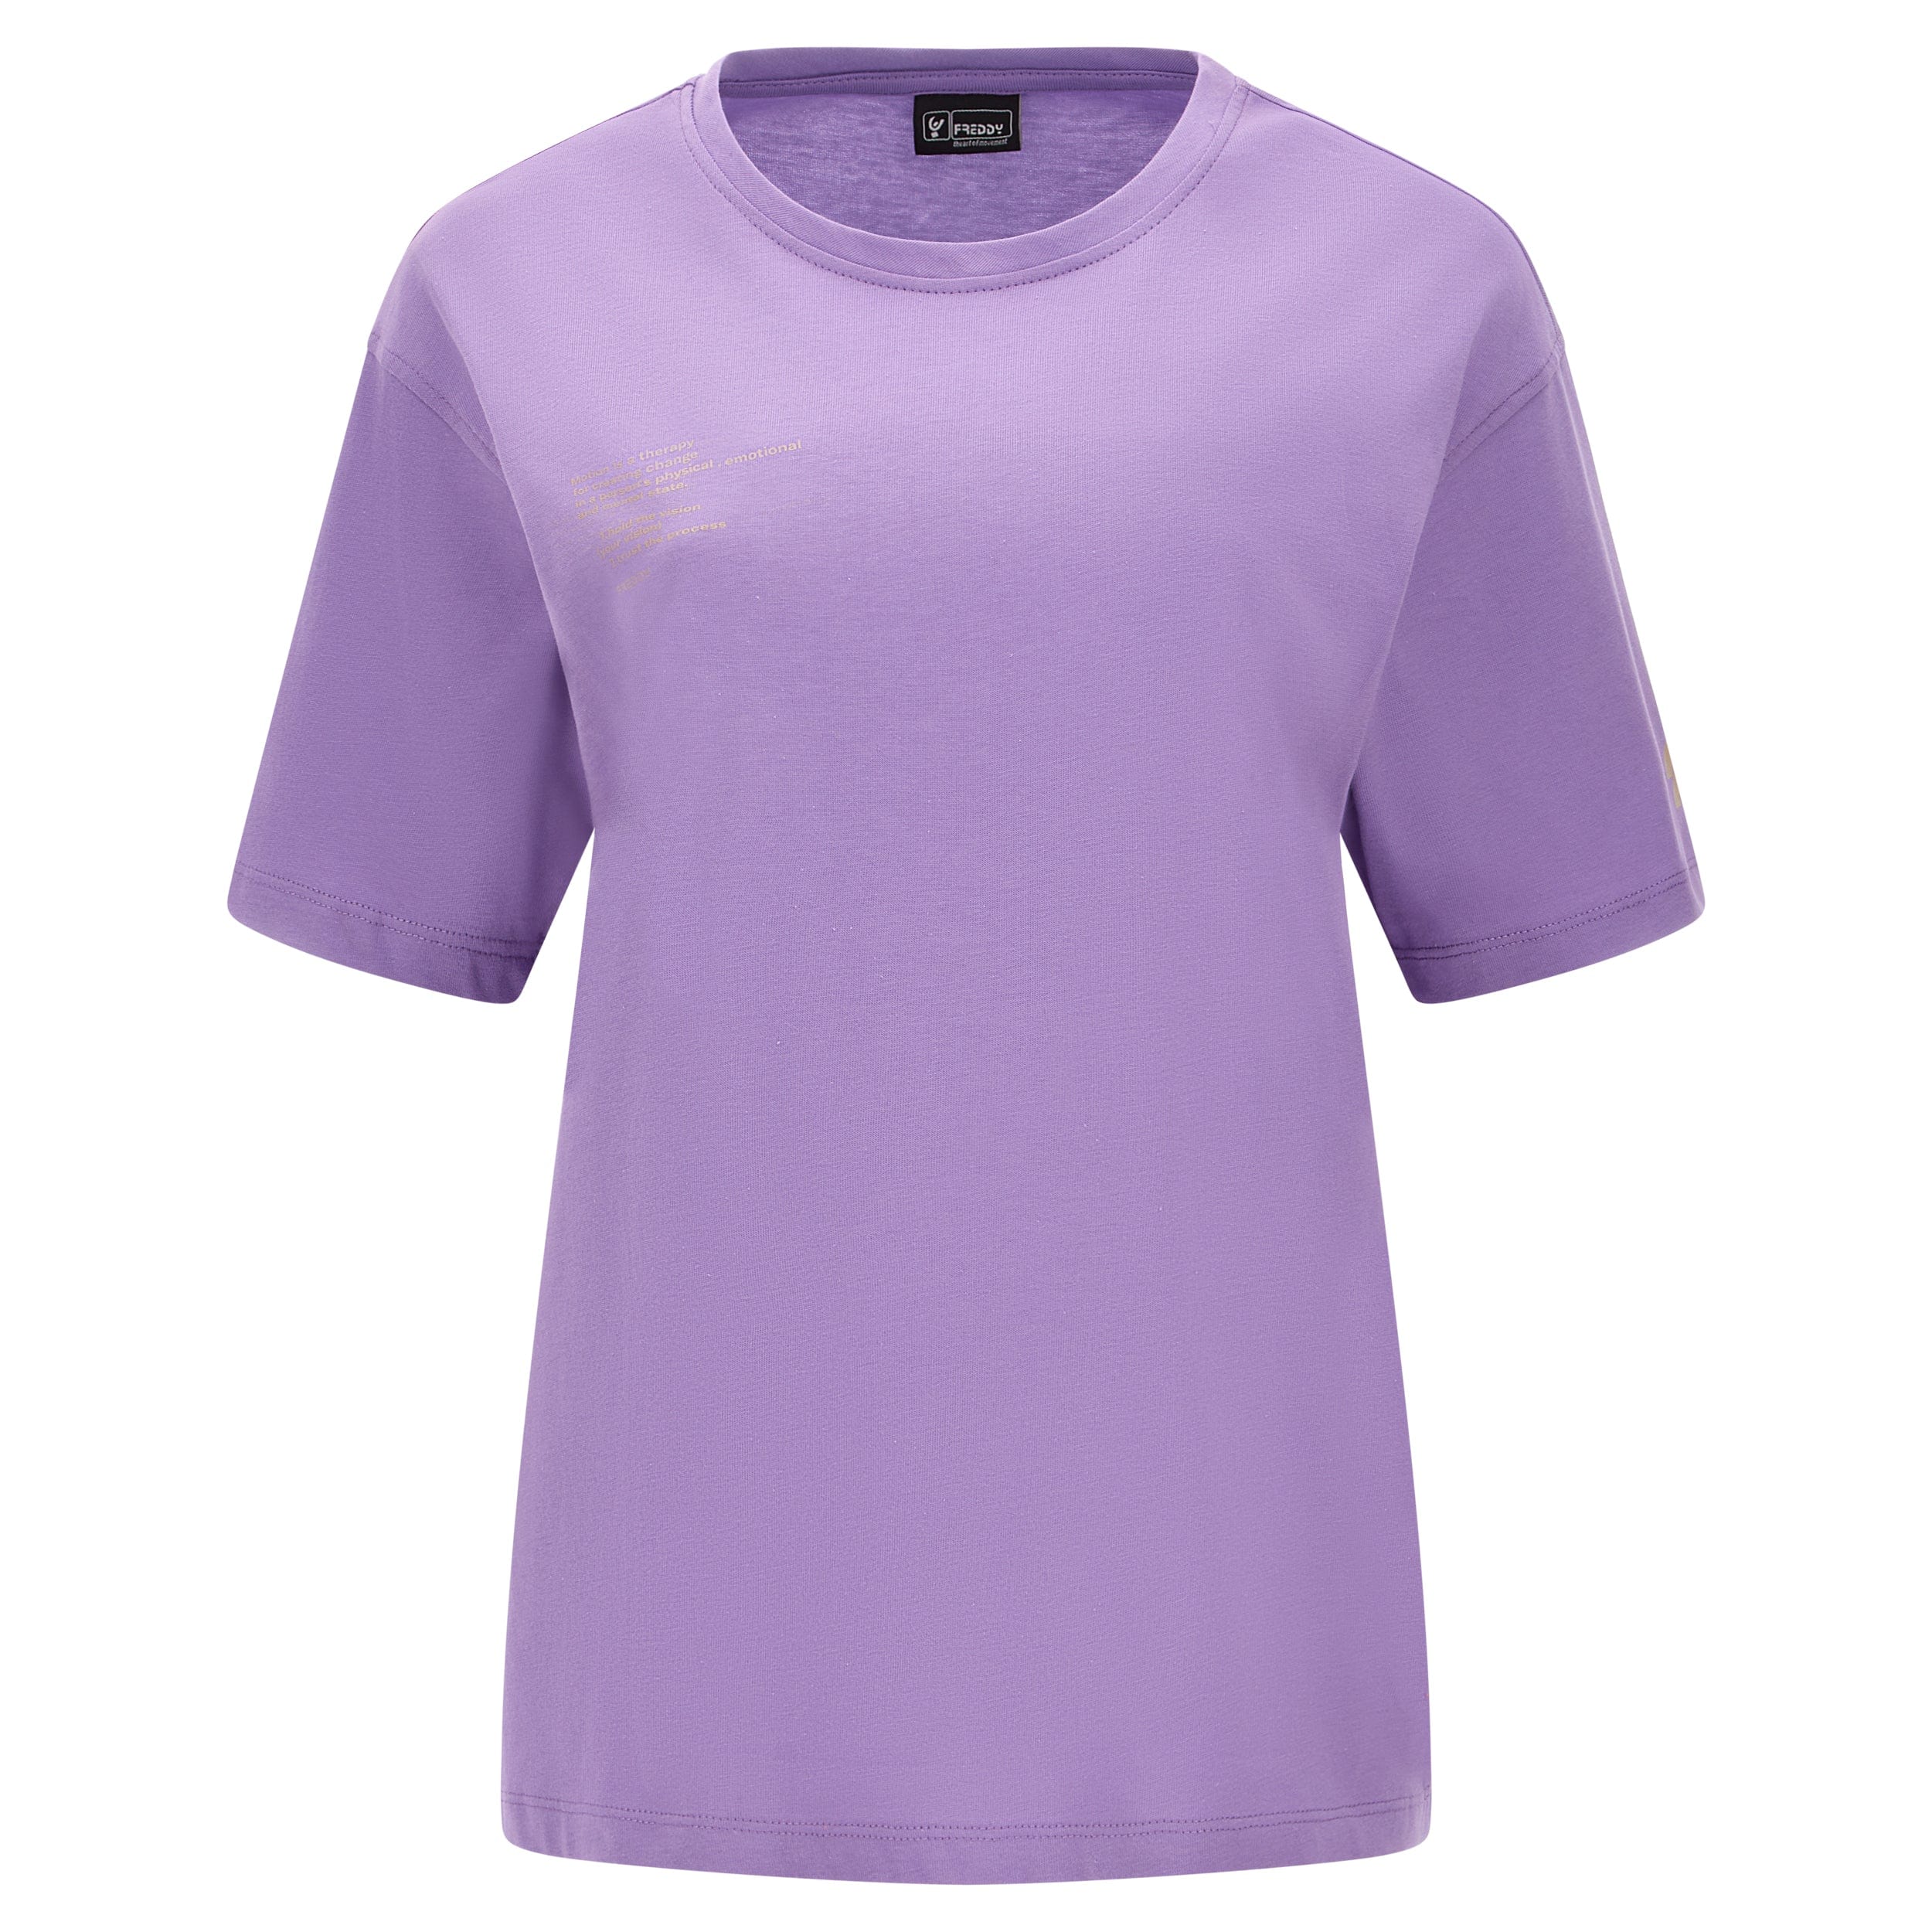 Comfort fit jersey t shirt with lettering  - English Lavender 1